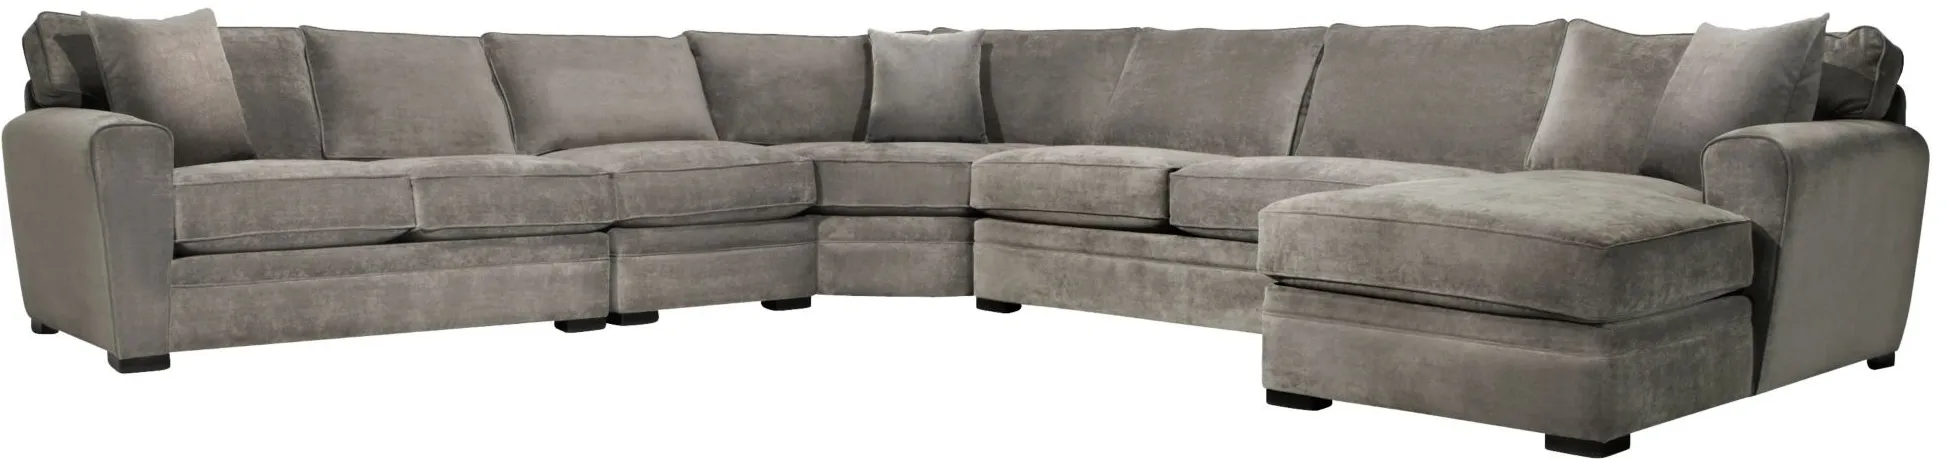 Artemis II 5-pc. Sectional Sofa in Gypsy Vintage by Jonathan Louis